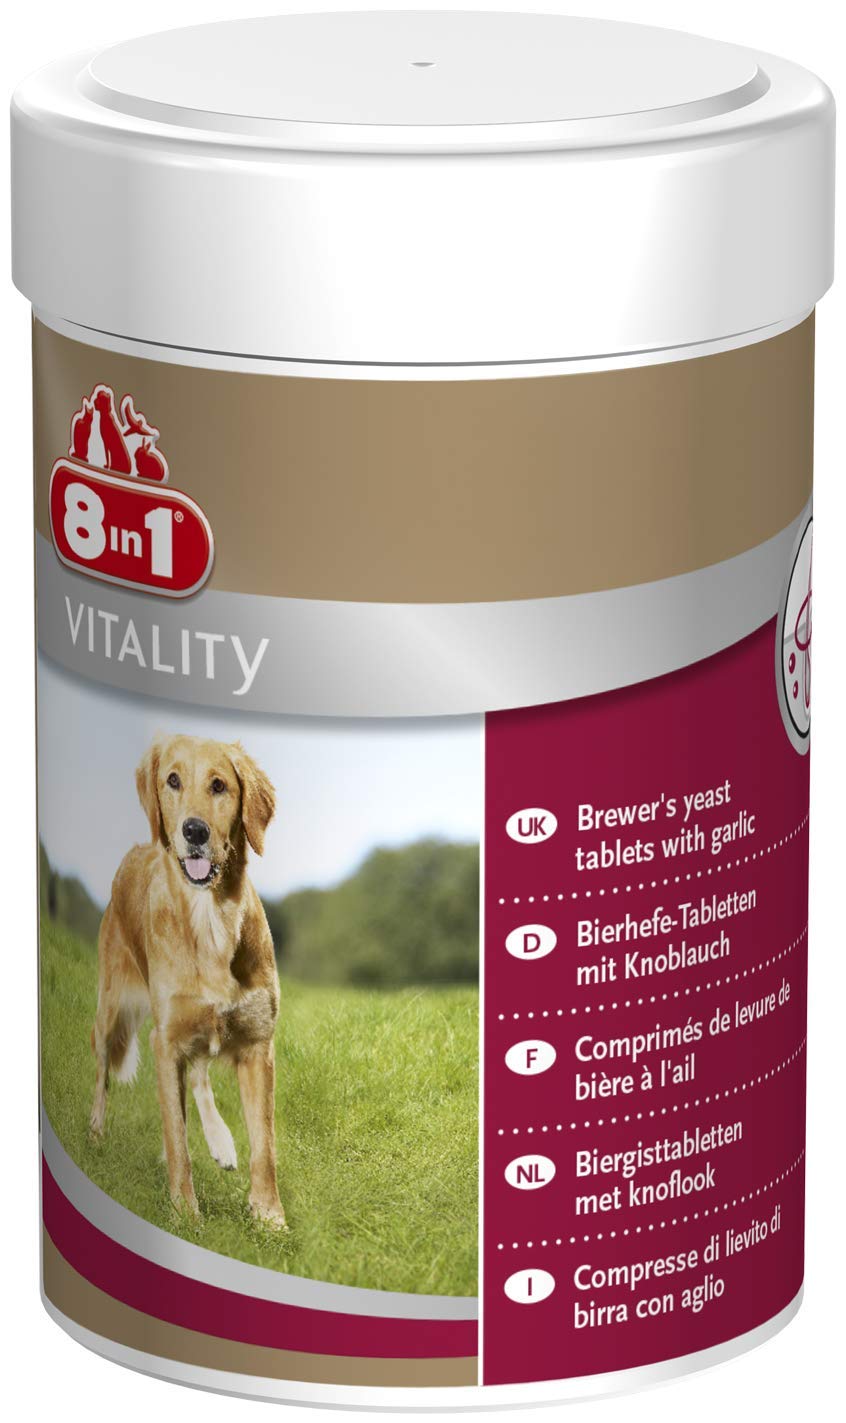 8in1 brewer's yeast tablets - unique combination of vitamins for dogs, supports skin and coat care, 260 tablets - PawsPlanet Australia